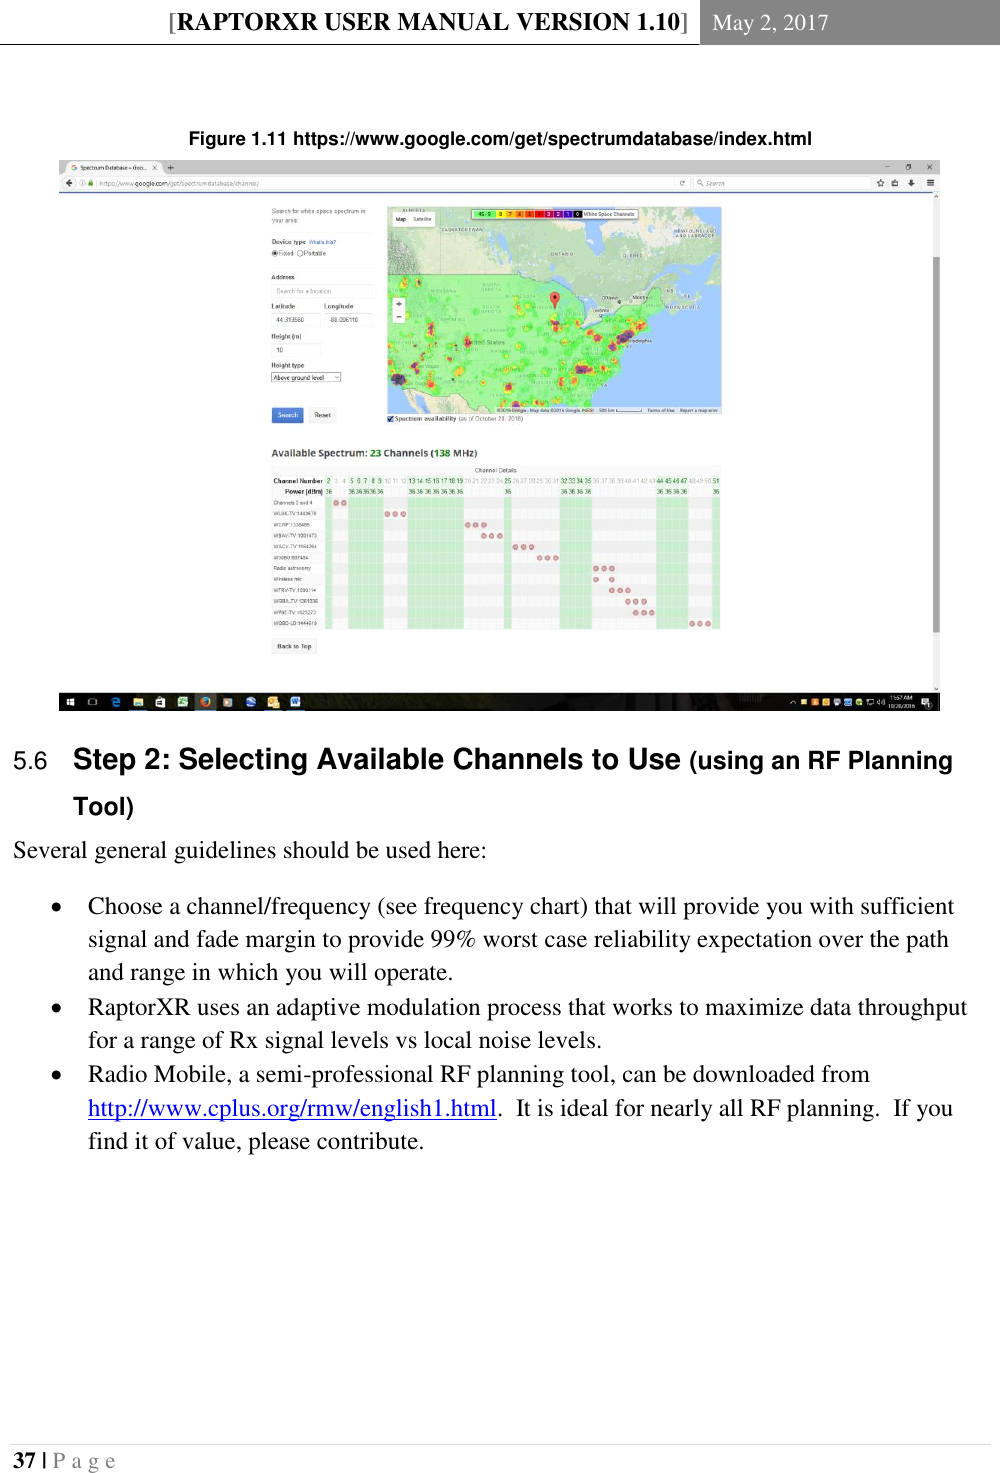 [RAPTORXR USER MANUAL VERSION 1.10] May 2, 2017  37 | P a g e    Figure 1.11 https://www.google.com/get/spectrumdatabase/index.html  Step 2: Selecting Available Channels to Use (using an RF Planning 5.6Tool)   Several general guidelines should be used here:  Choose a channel/frequency (see frequency chart) that will provide you with sufficient signal and fade margin to provide 99% worst case reliability expectation over the path and range in which you will operate.  RaptorXR uses an adaptive modulation process that works to maximize data throughput for a range of Rx signal levels vs local noise levels.  Radio Mobile, a semi-professional RF planning tool, can be downloaded from http://www.cplus.org/rmw/english1.html.  It is ideal for nearly all RF planning.  If you find it of value, please contribute.    